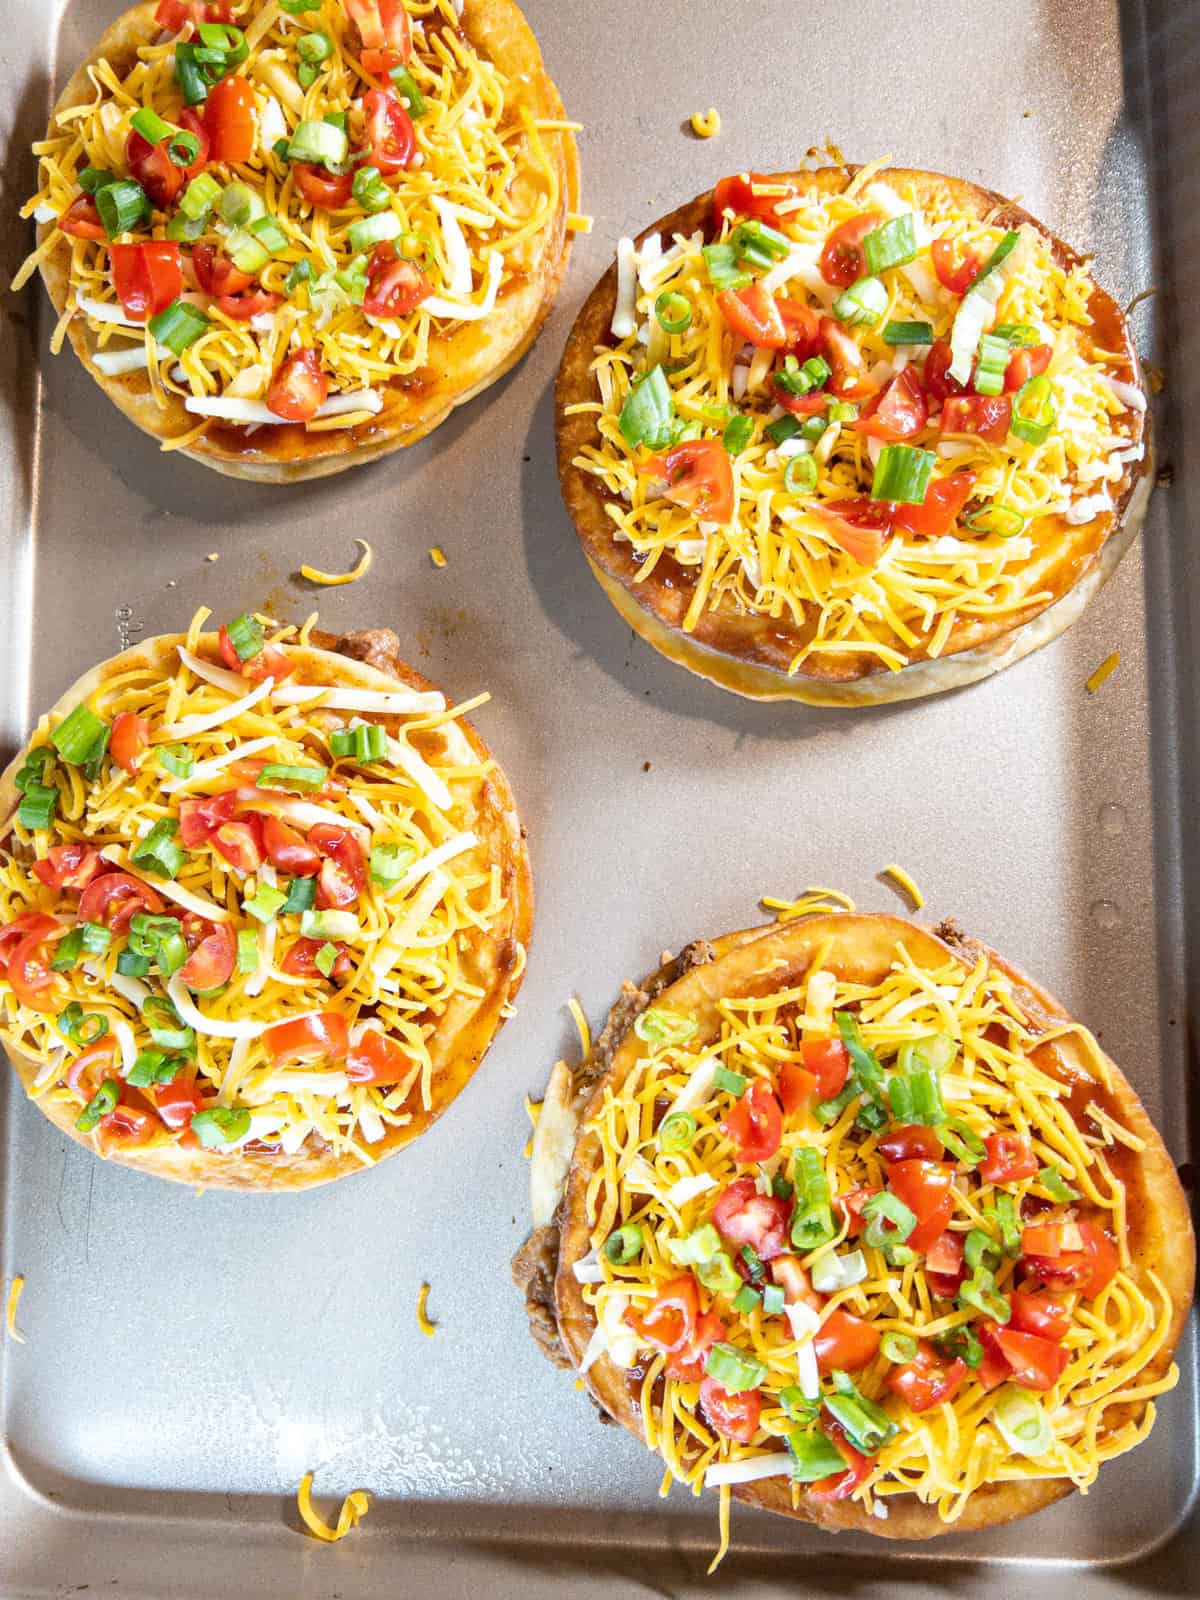 assembled Mexican pizzas on a baking sheet